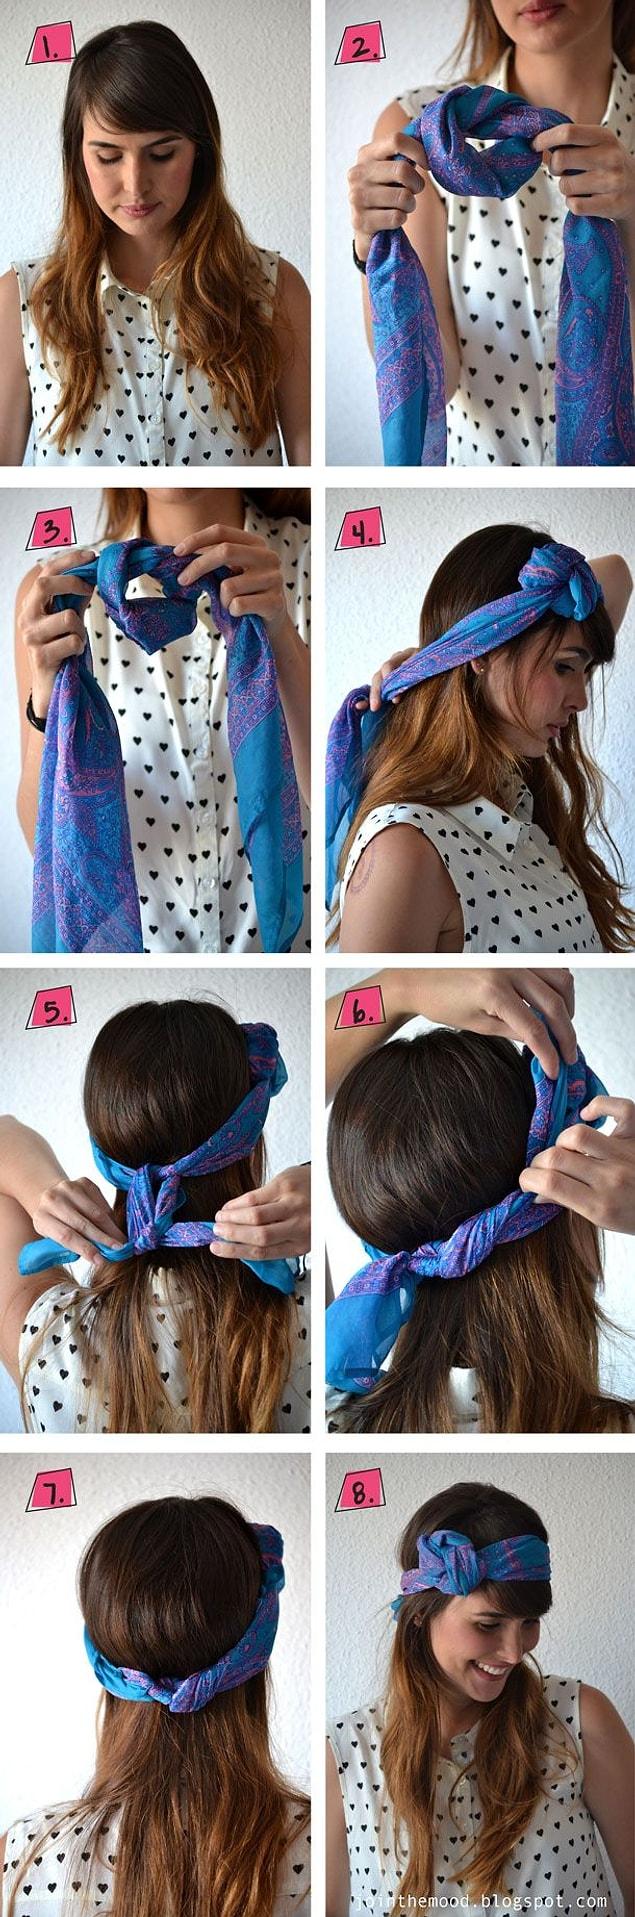 15. A knot that you can tie on a long bandana could only make this much of a big difference.